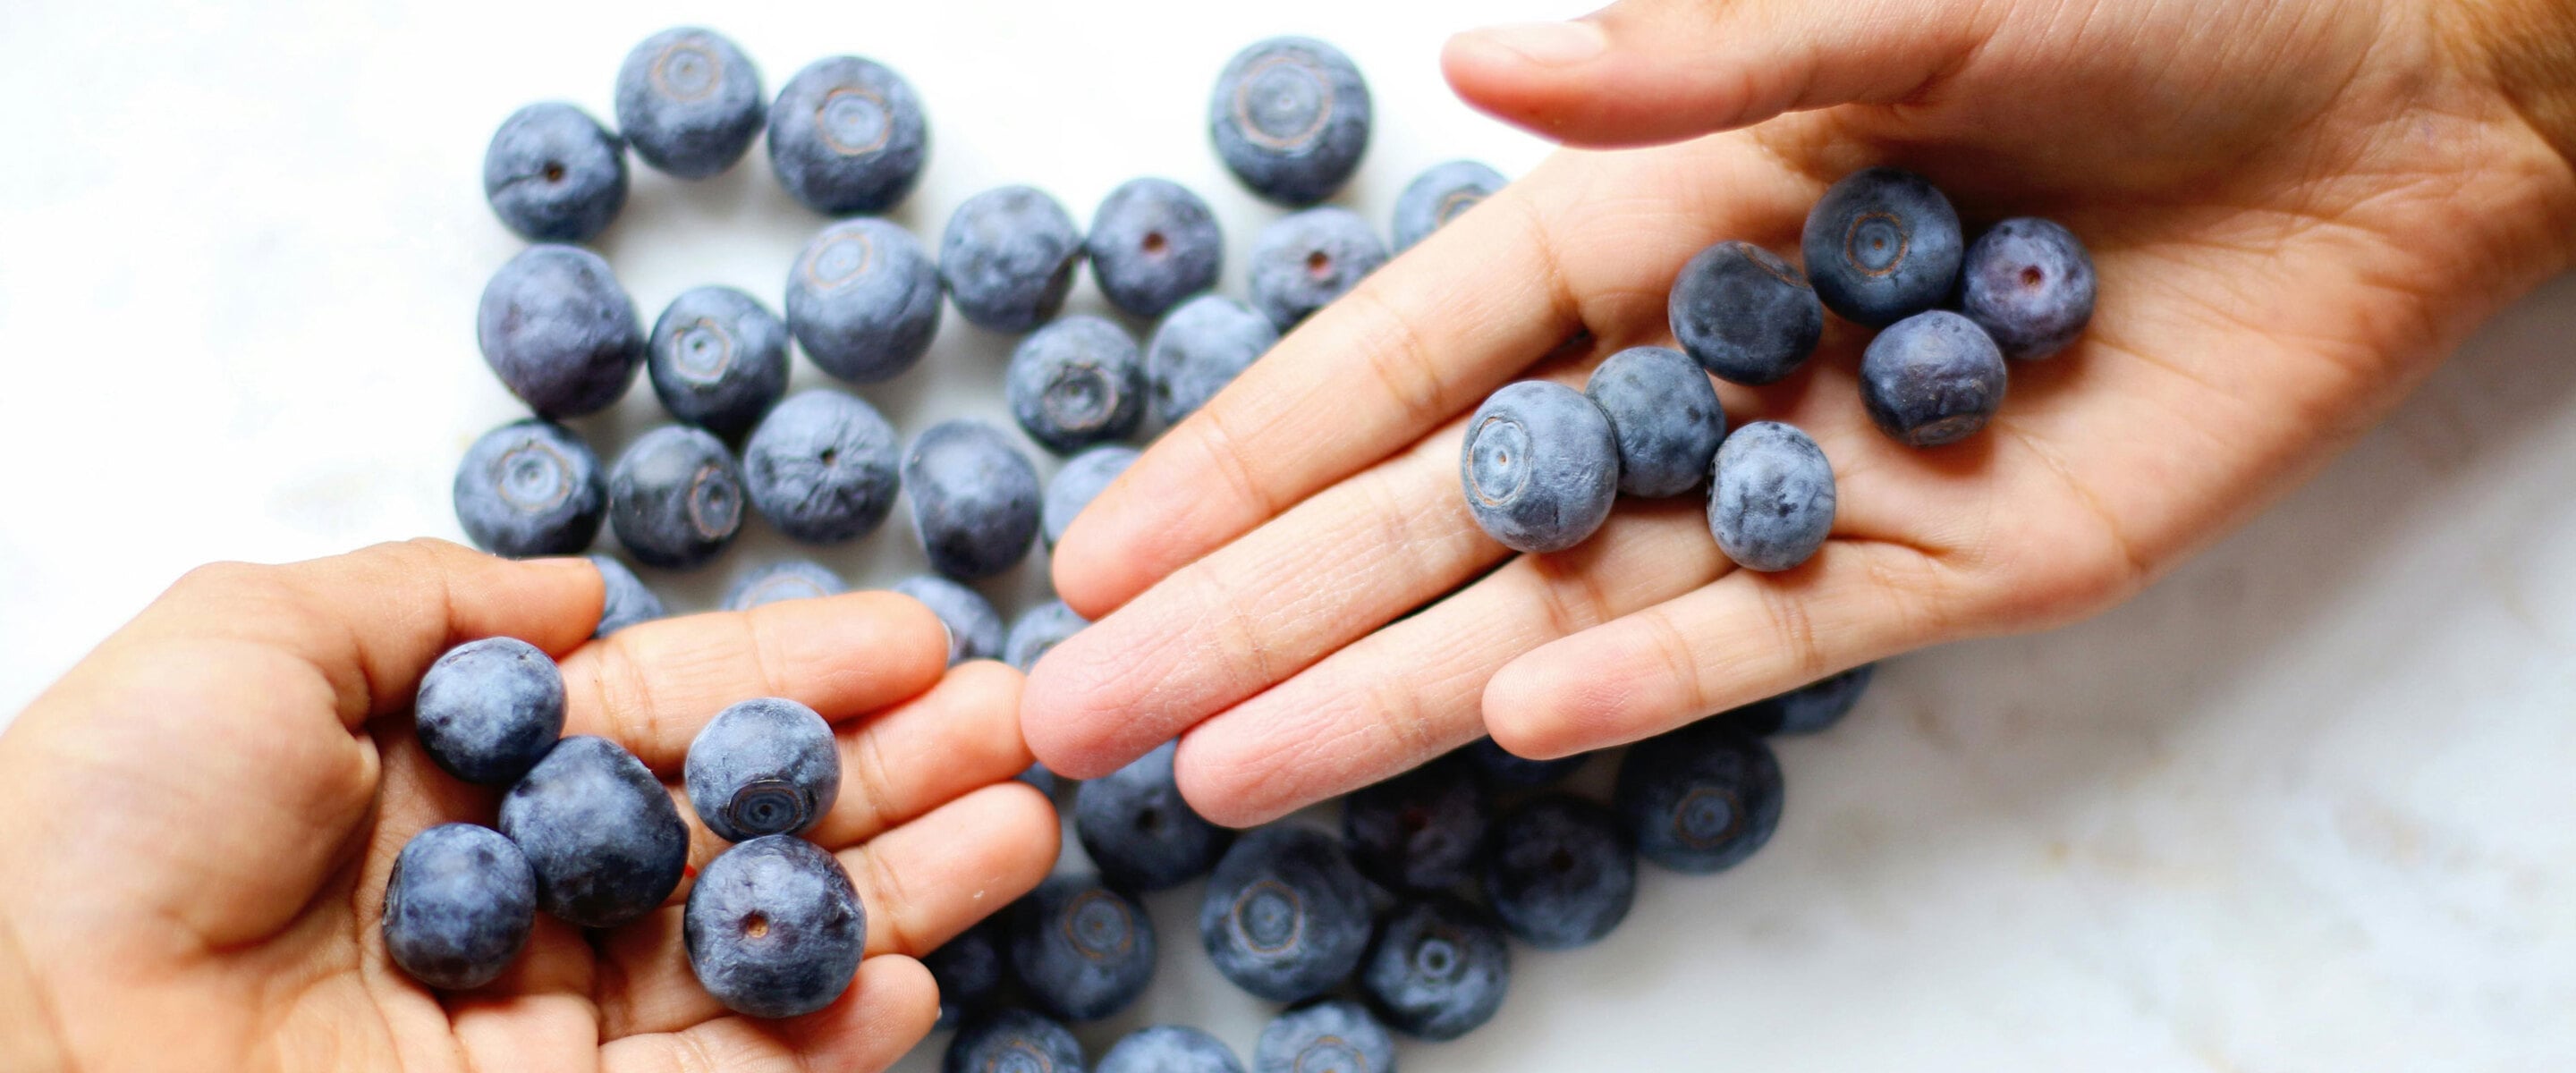 Eat These 5 Science-Backed Foods to Help Boost Your Memory